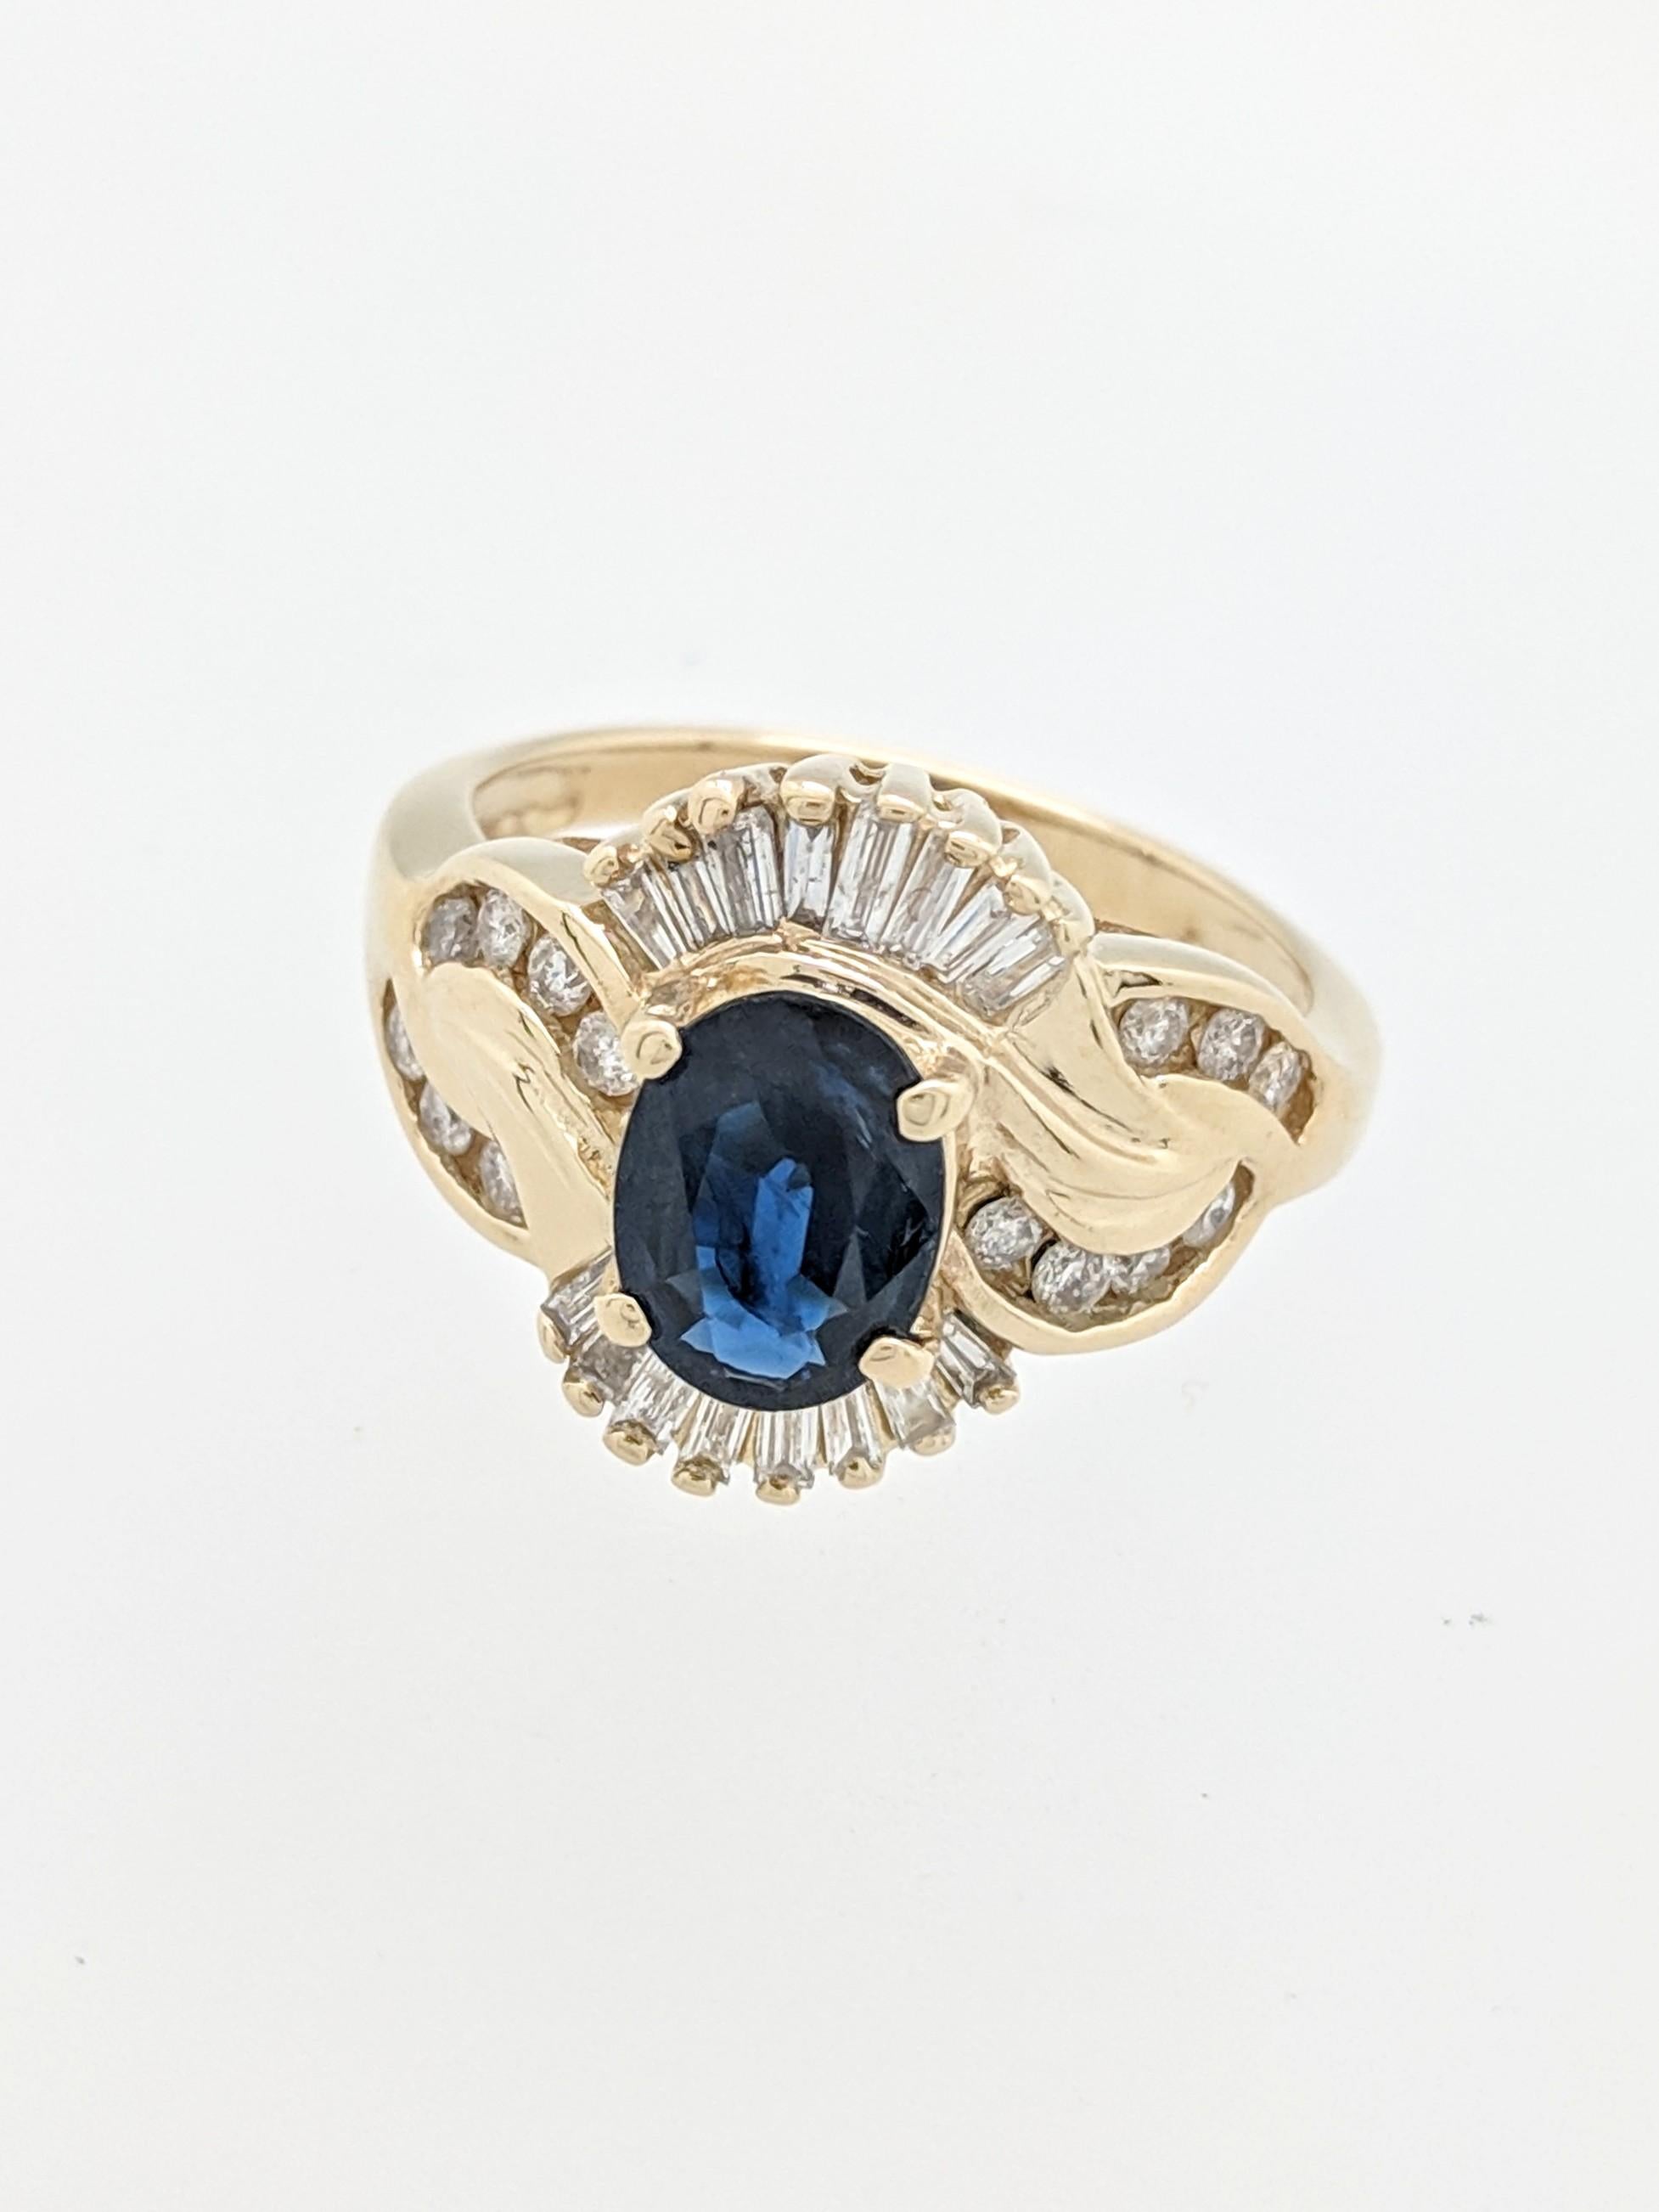 14k Yellow Gold Sapphire & Diamond Estate Ring

You are viewing a beautiful sapphire and diamond ring. Any woman would love to add this piece to their collection!

This ring is crafted from 14k yellow gold and weighs 5.4 grams. It features